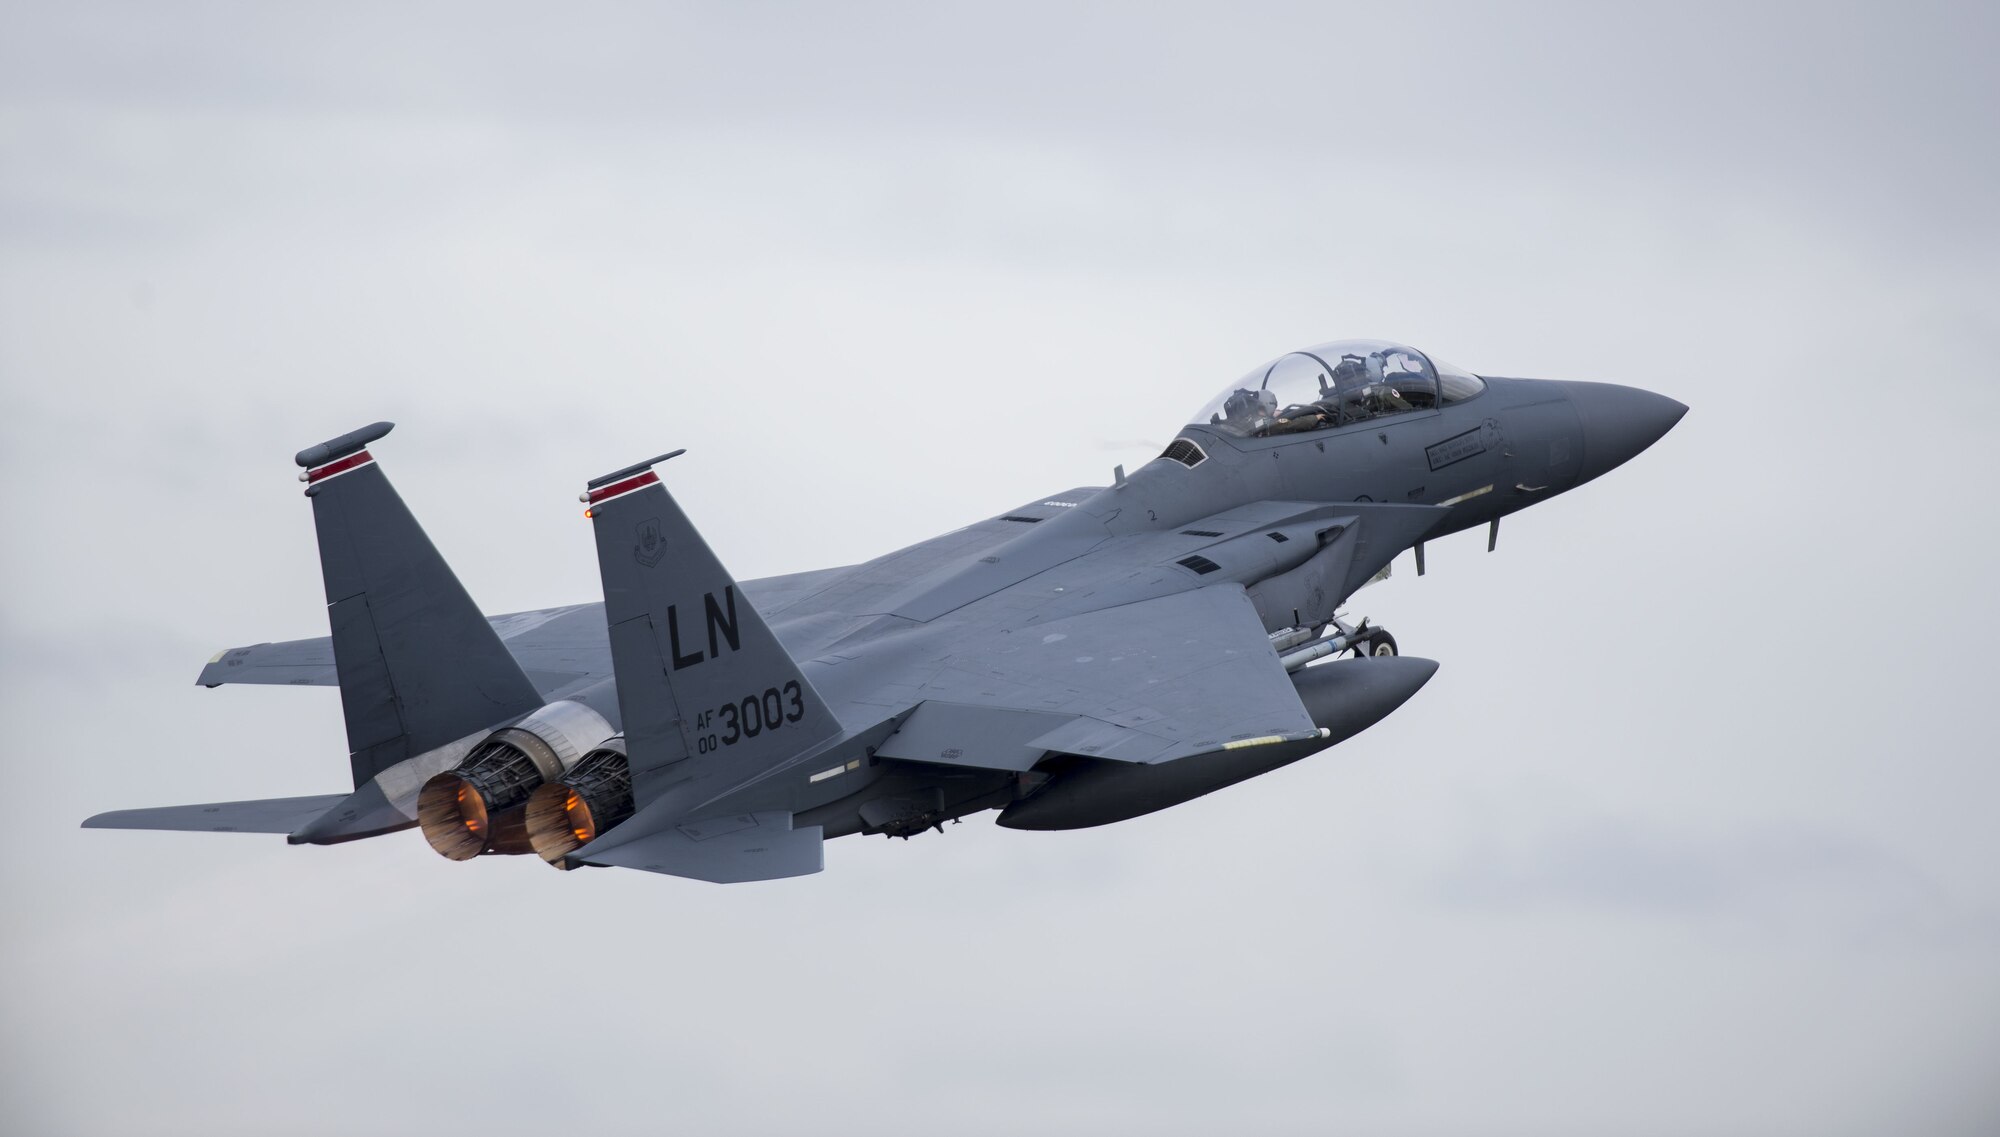 An F-15E Strike Eagle from the 494th Fighter Squadron takes off from Royal Air Force Lakenheath, England, Feb. 7, 2018. The 48th Fighter Wing conducts sorties to help both aircrews and support personnel on the ground to meet essential training requirements to ensure and maintain a ready and capable force. (U.S. Air Force photo/Senior Airman Malcolm Mayfield)